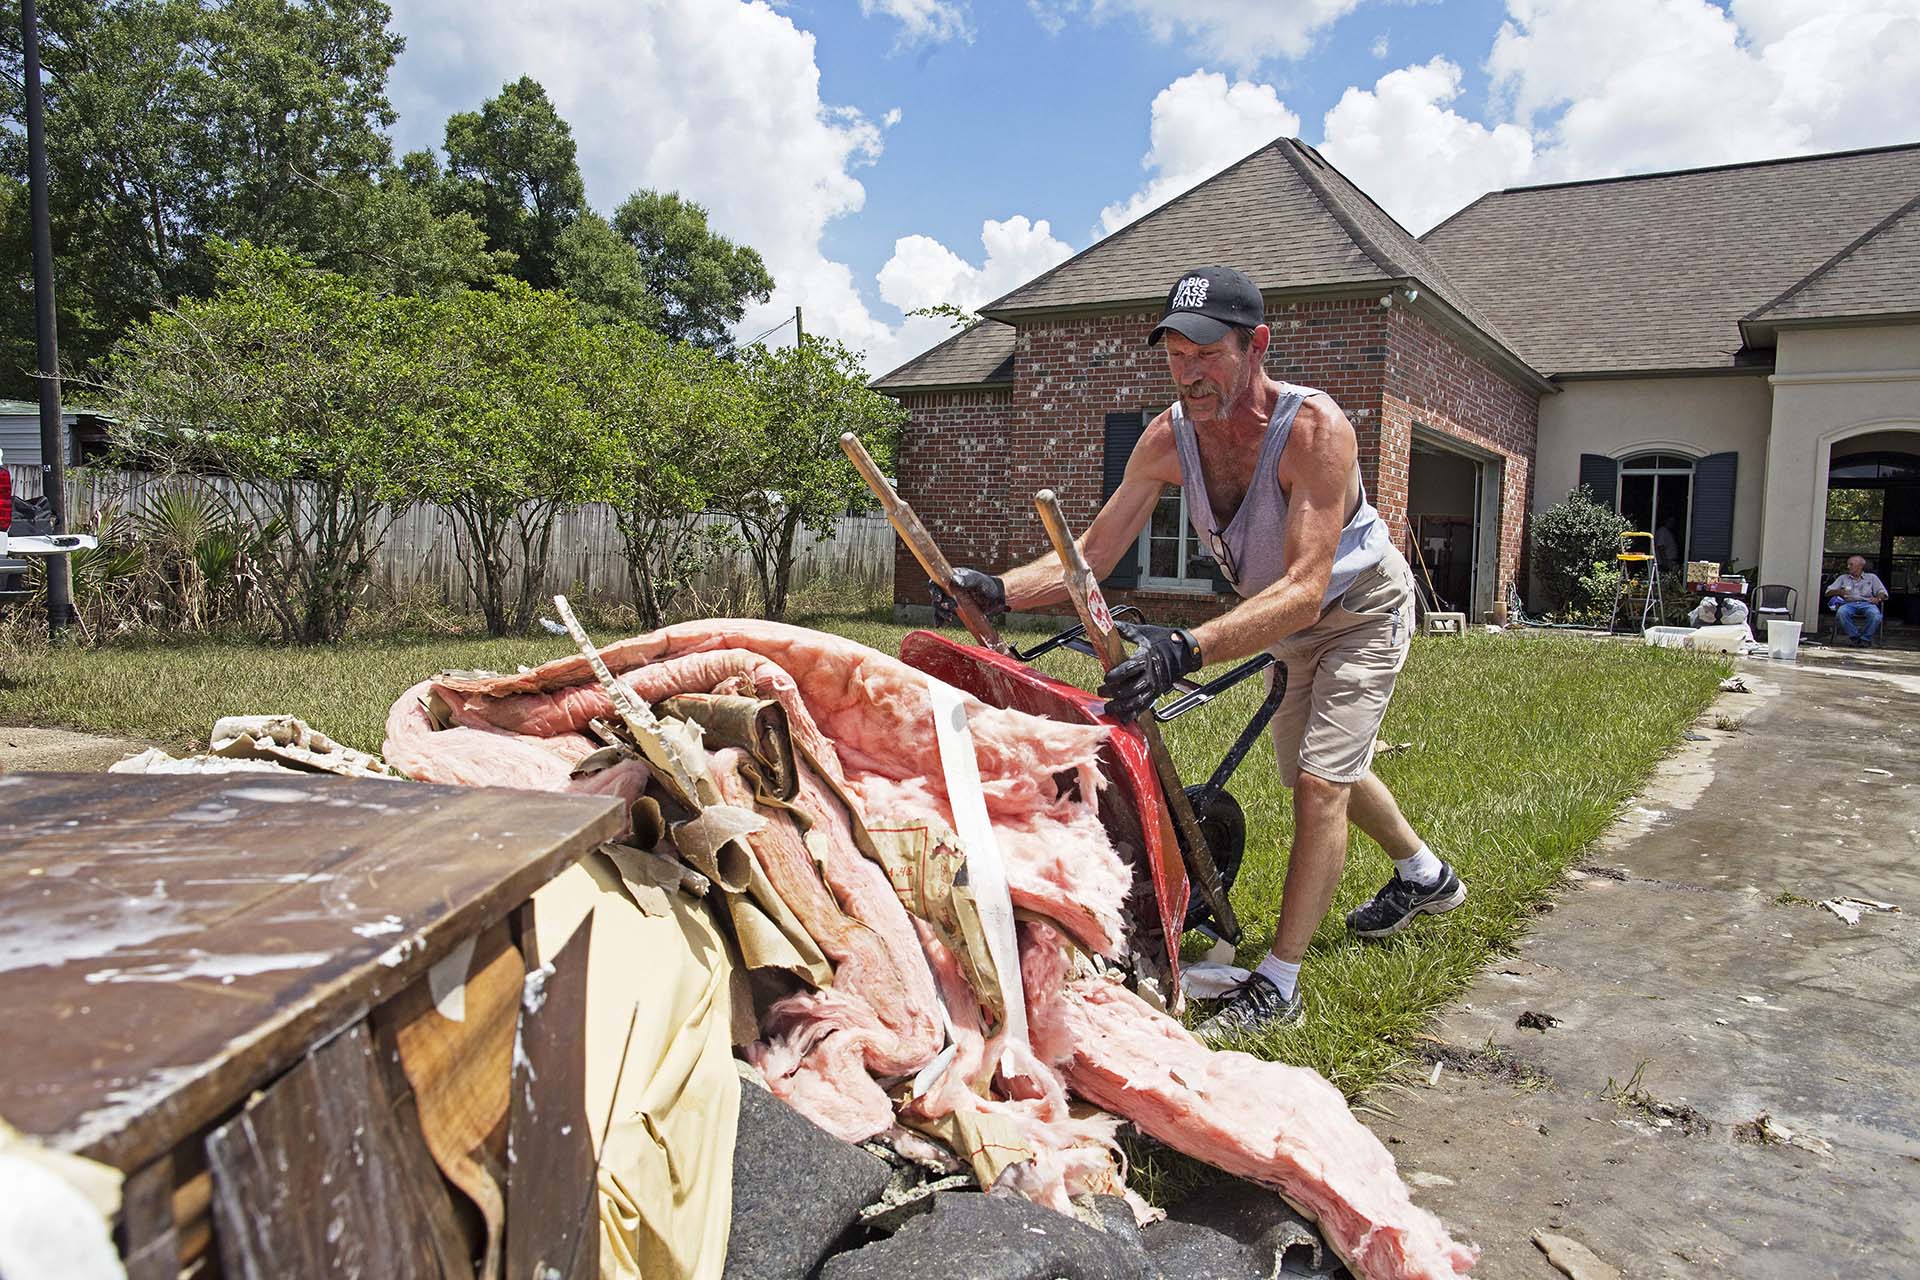 Jody Harelson, 52, dumps a wheel barrel of wet sheet rock an ever growing pile of rubbish as he helps clean out the flood damaged home of Sheila Siener, 58, in St. Amant, La., Saturday, Aug. 20, 2016.  Louisiana continues to dig itself out from devastating floods, with search parties going door to door looking for survivors.  (AP Photo/Max Becherer)